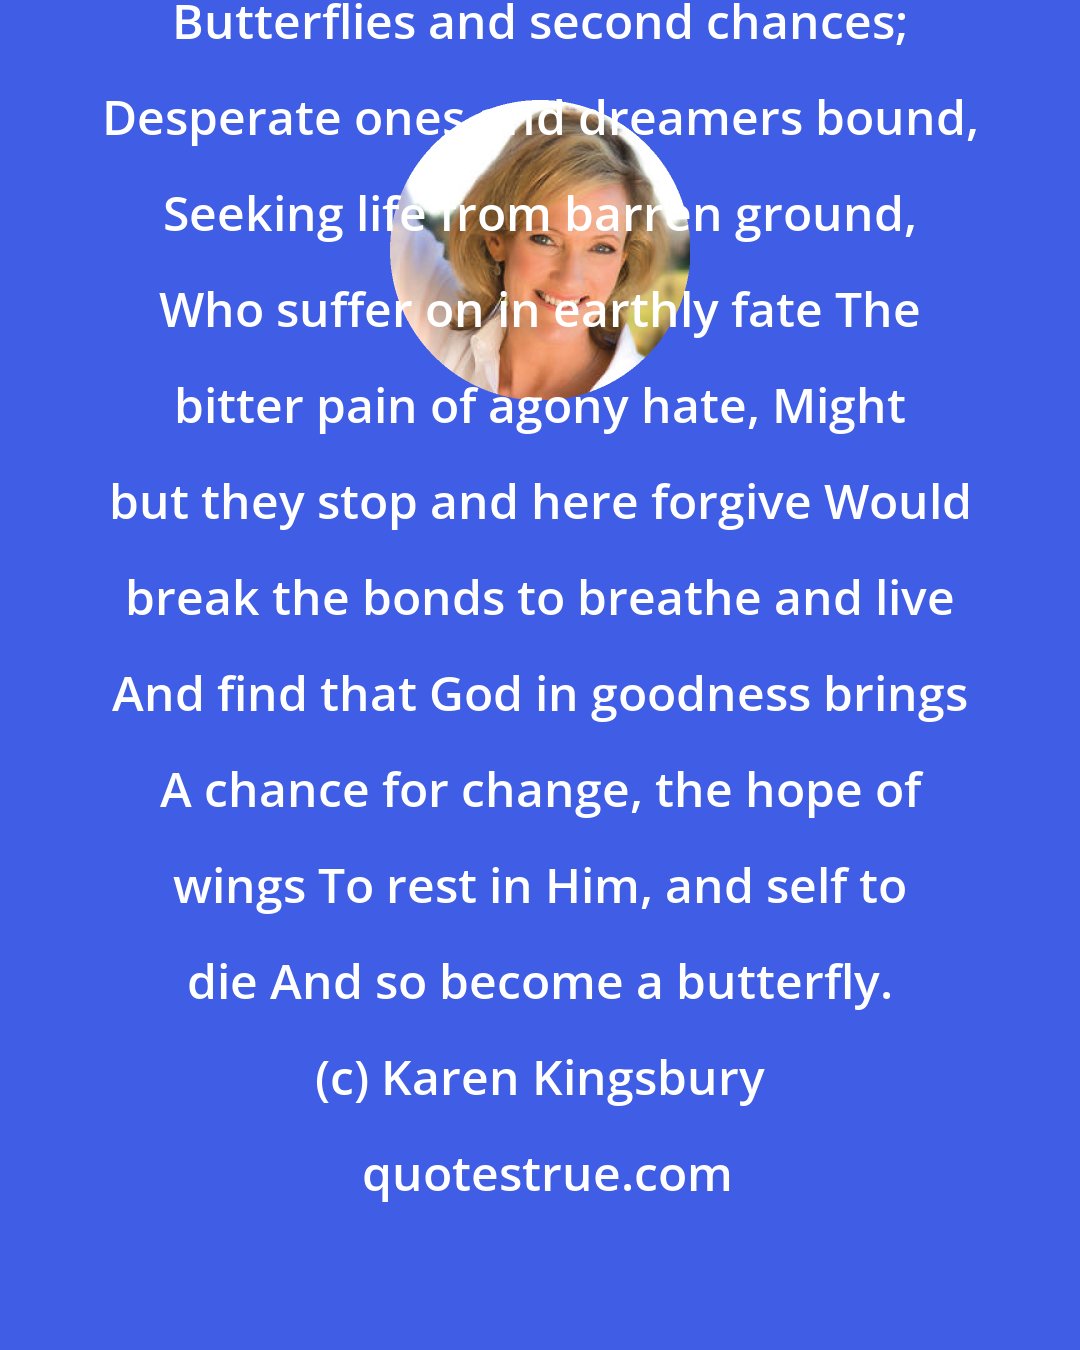 Karen Kingsbury: I tell of hearts and souls and dances... Butterflies and second chances; Desperate ones and dreamers bound, Seeking life from barren ground, Who suffer on in earthly fate The bitter pain of agony hate, Might but they stop and here forgive Would break the bonds to breathe and live And find that God in goodness brings A chance for change, the hope of wings To rest in Him, and self to die And so become a butterfly.